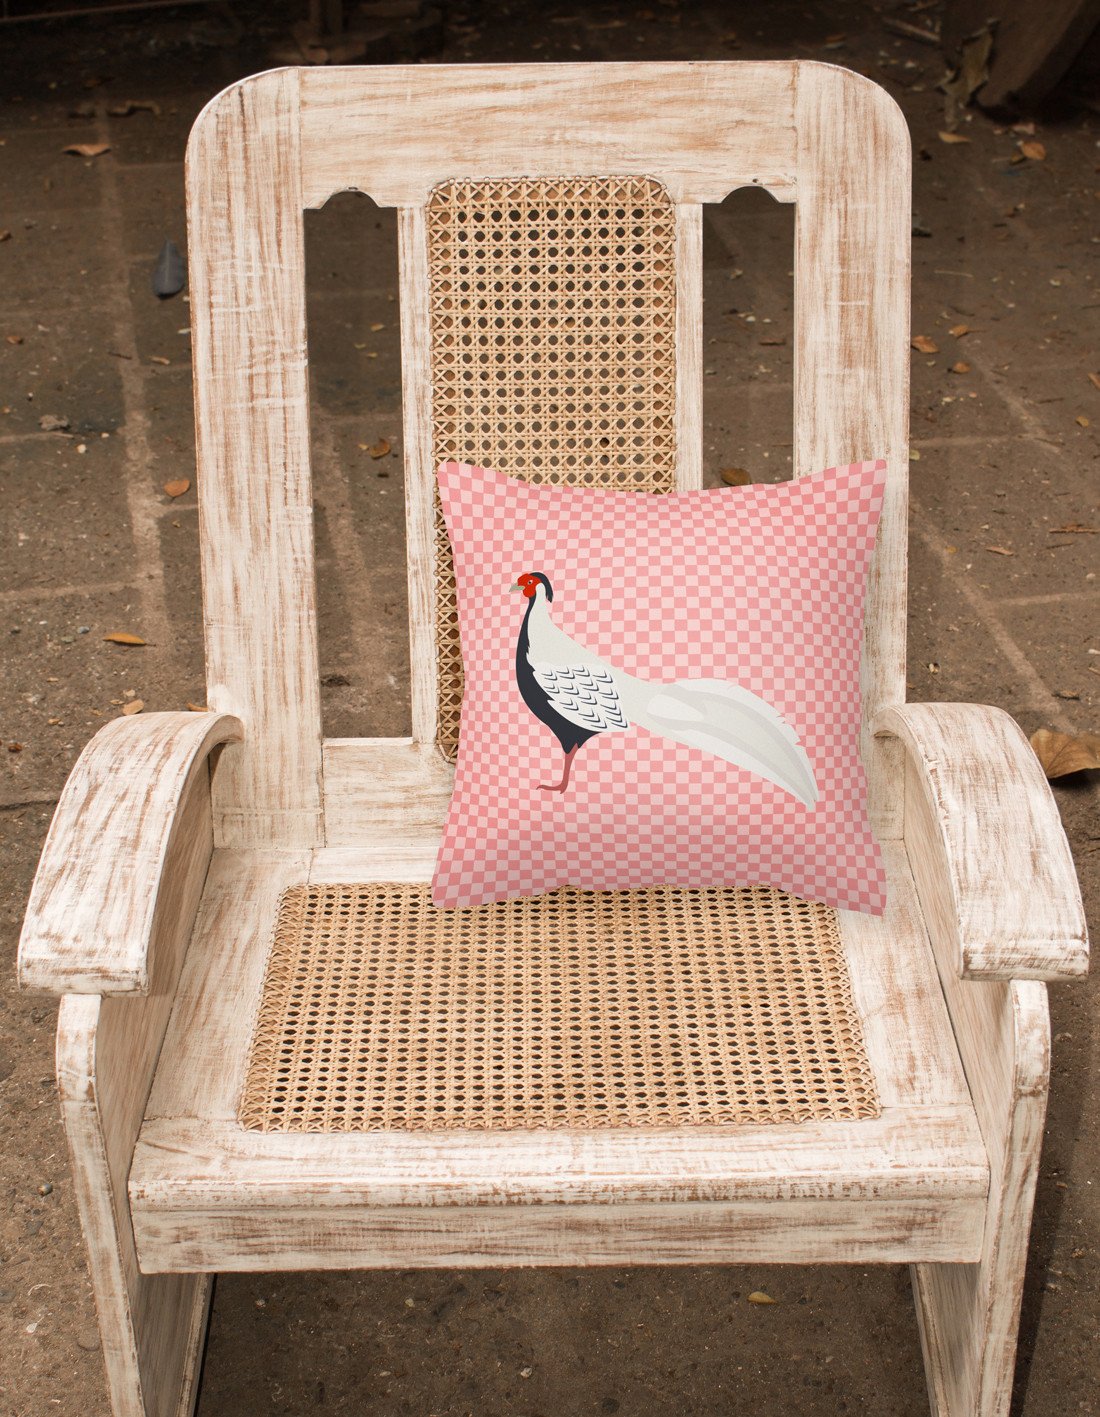 Silver Pheasant Pink Check Fabric Decorative Pillow BB7929PW1818 by Caroline's Treasures